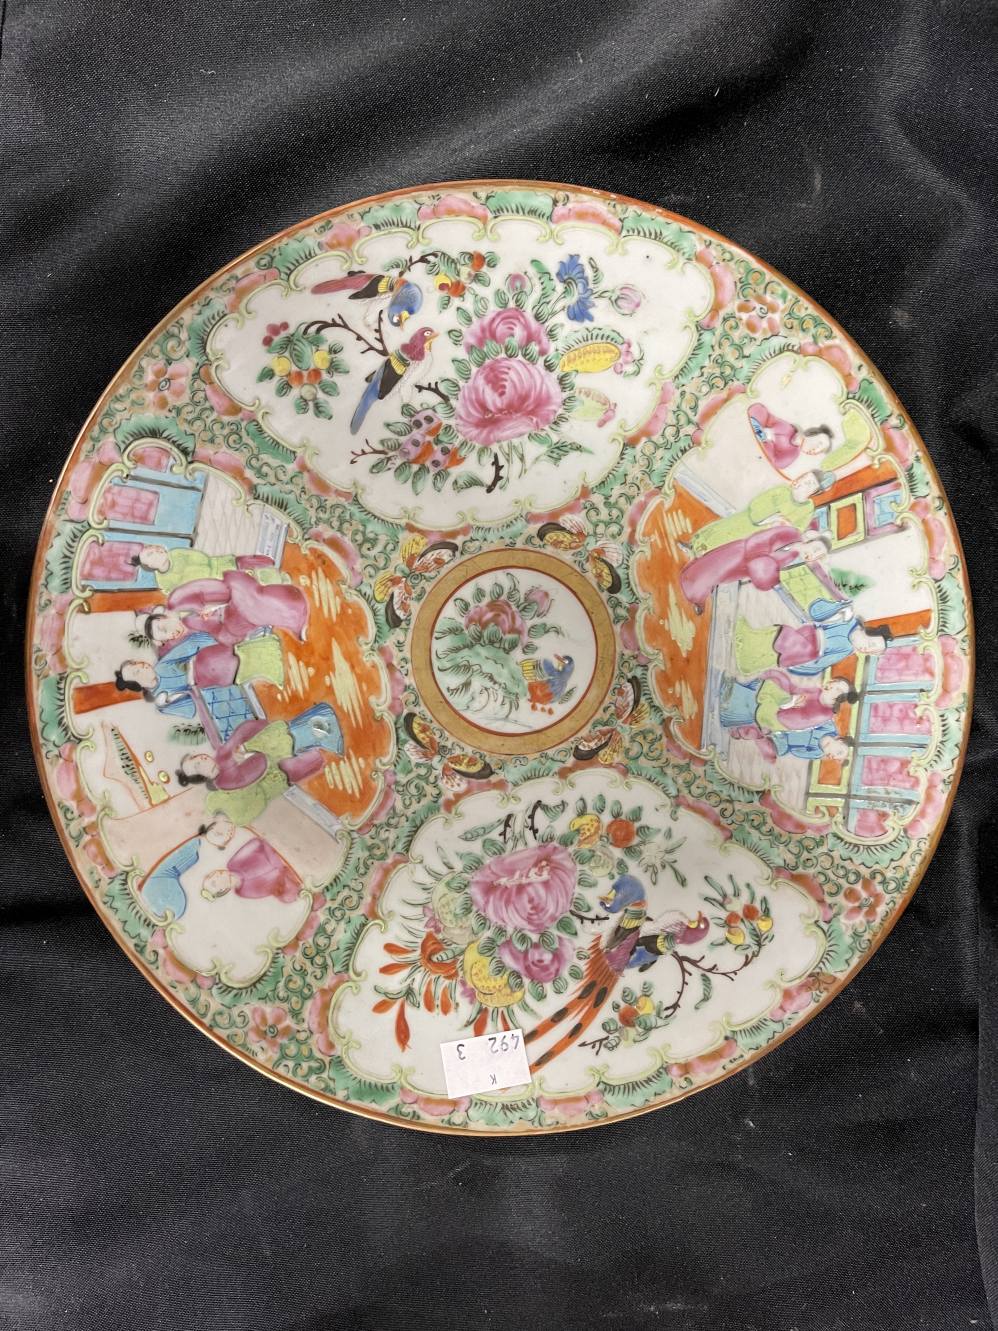 19th cent. Chinese Canton plates all typically decorated with panels of flowers, figures and